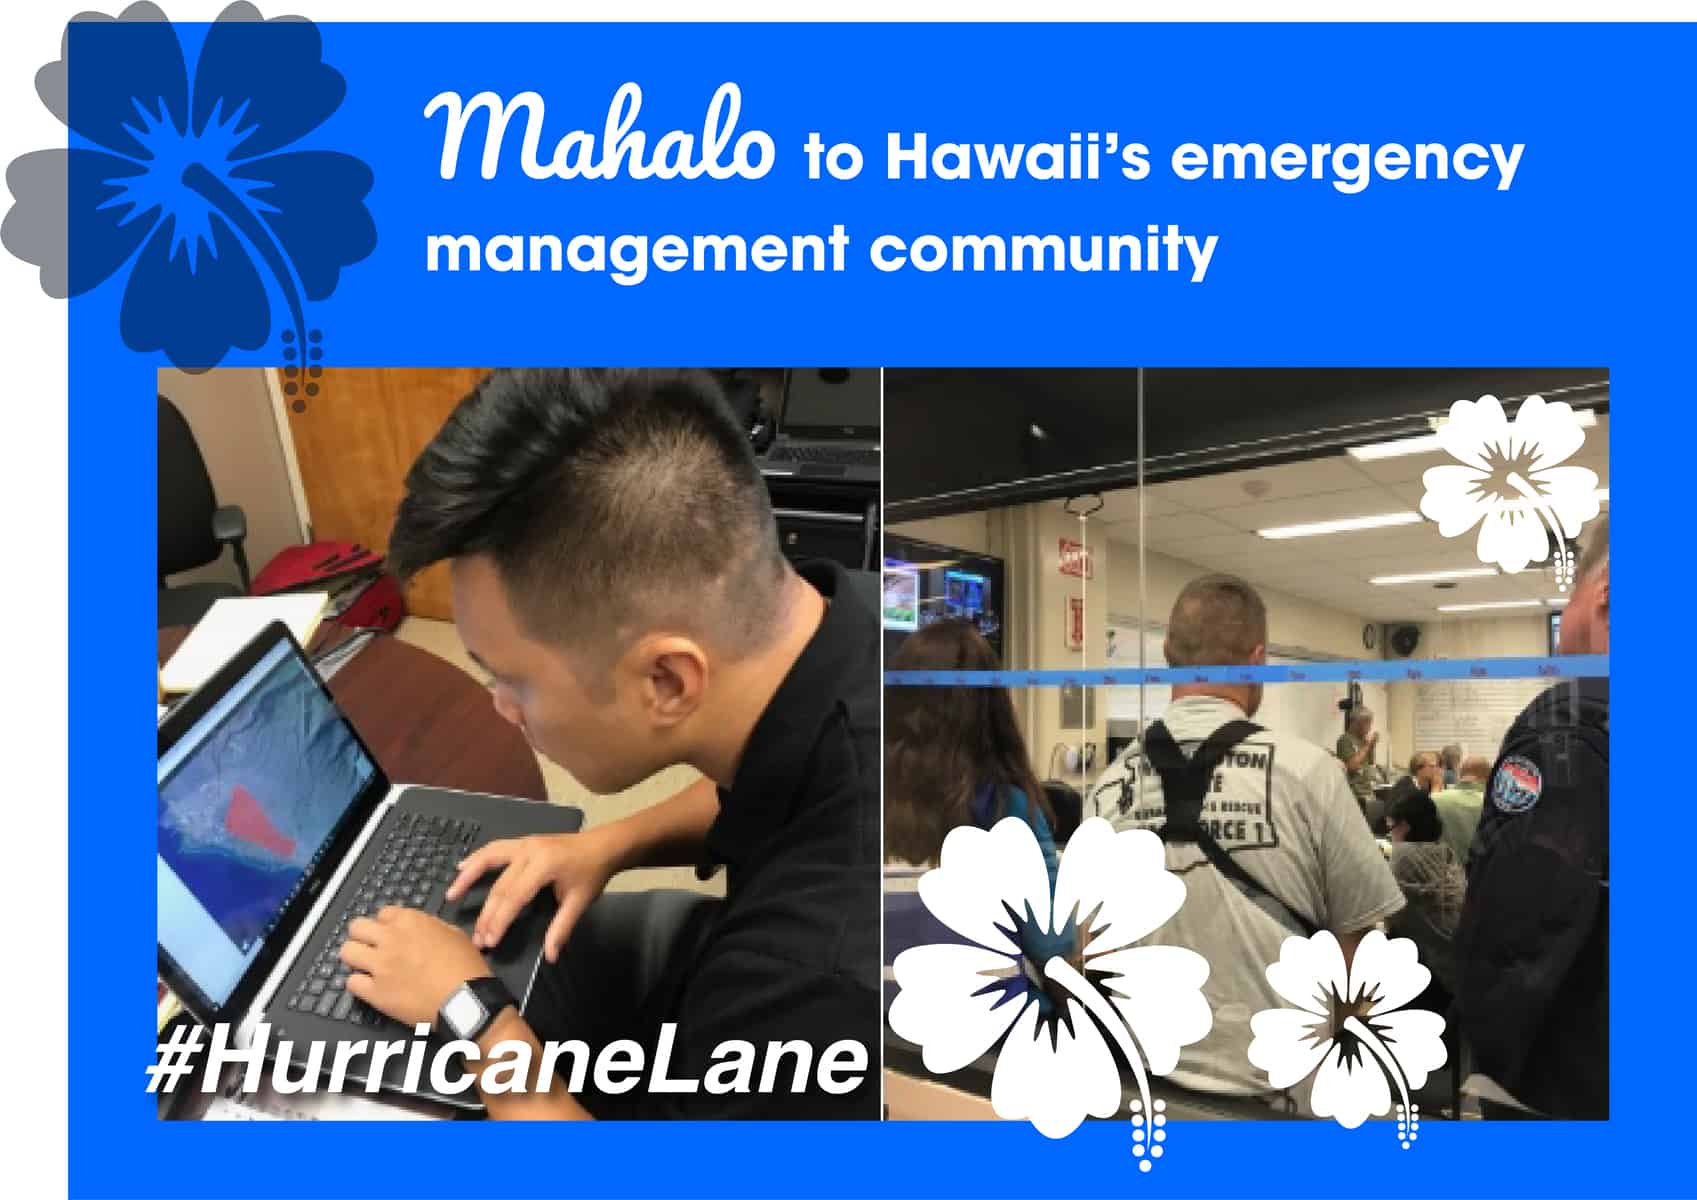 Mahalo to the Emergency Management Community for your service during Hurricane Lane